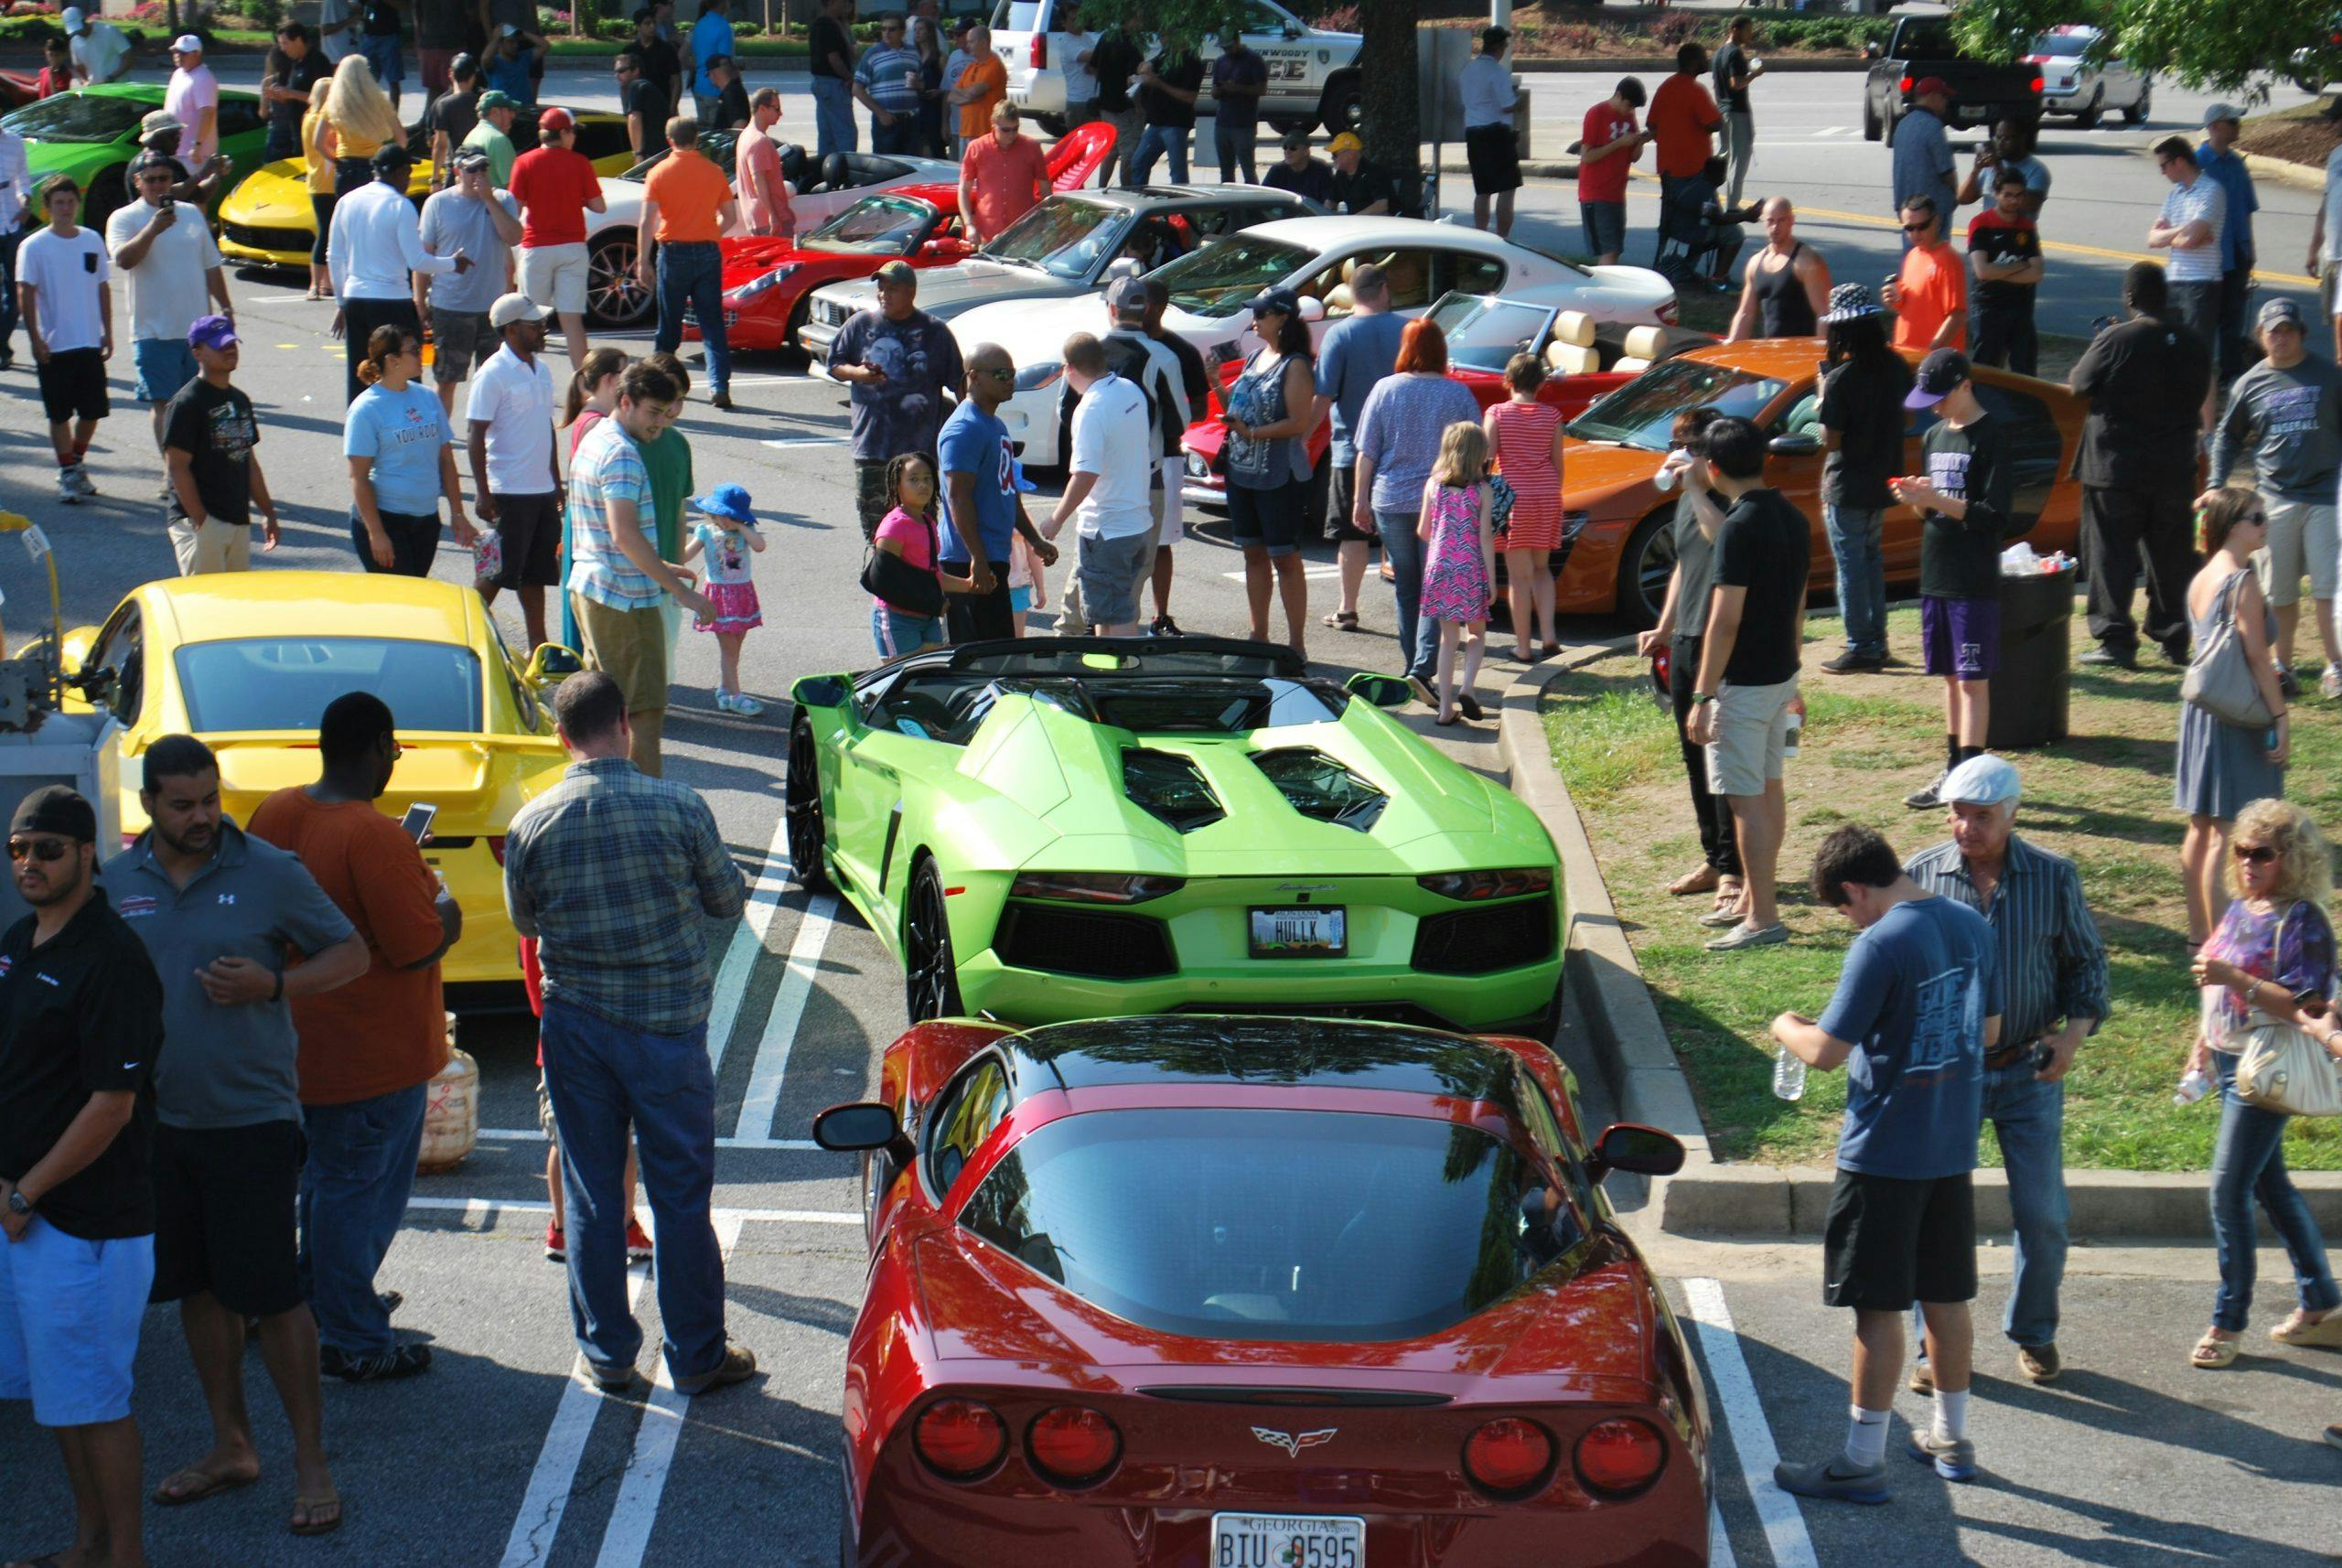 Families gather around a supercar at Caffeine and Octane